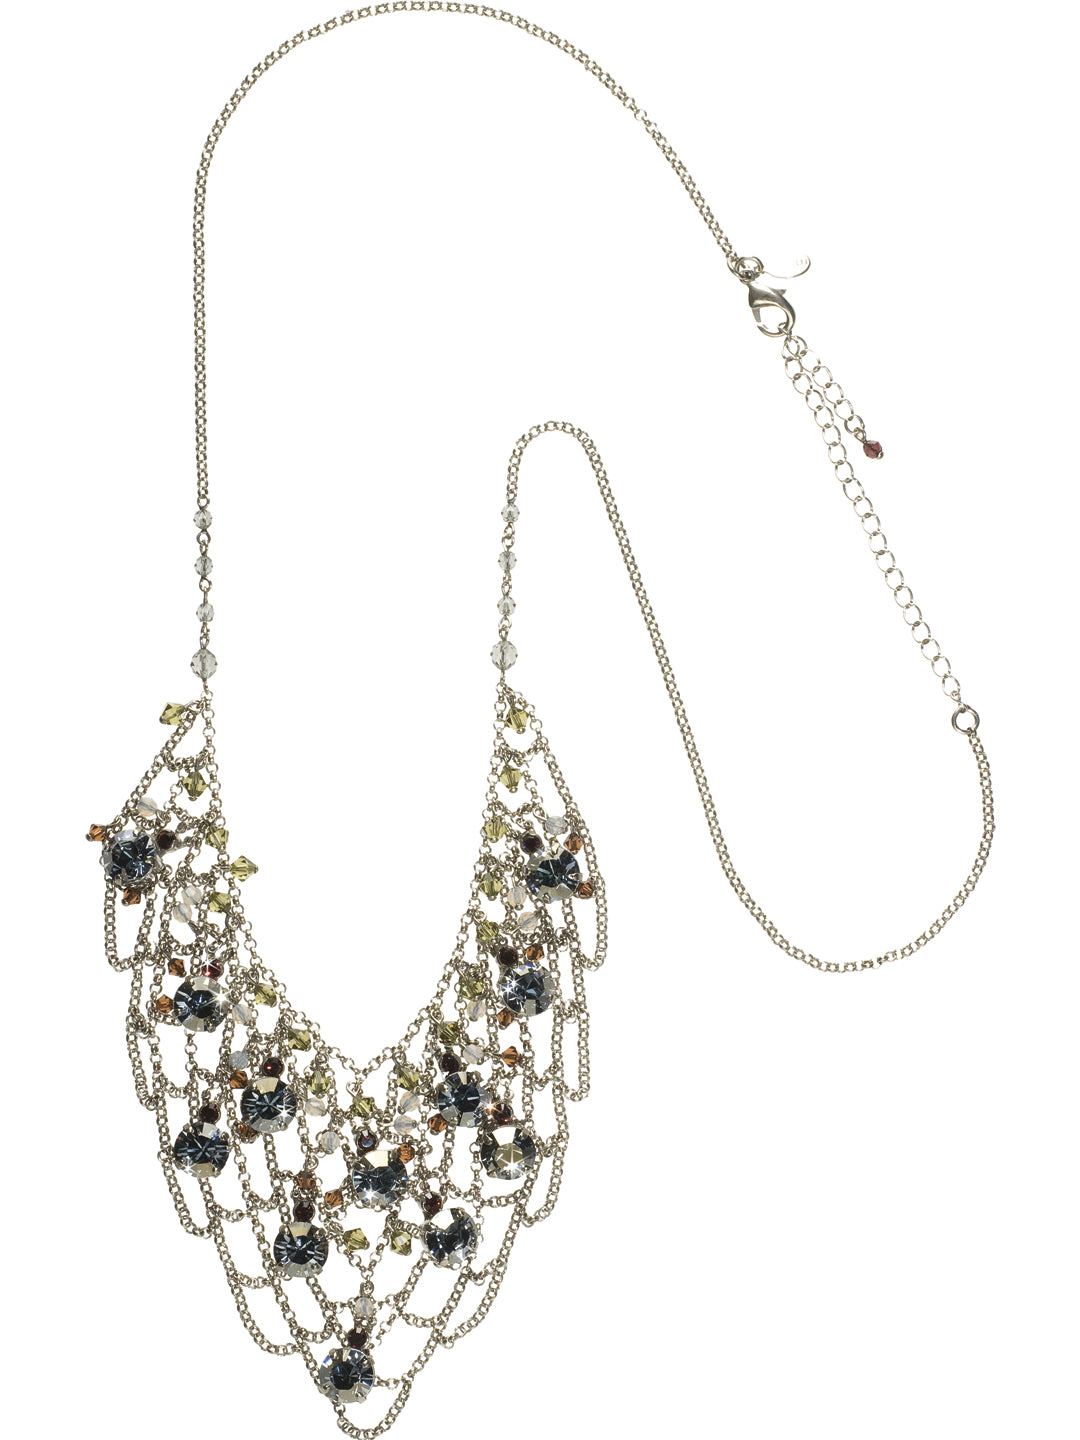 Drenched In Sparkle Bib Necklace Bib Necklace - NCM23ASCJ - Add this fresh splash of style to any outfit and you'll be dripping with luxurious length... and compliments! This long bib necklace is saturated with sparkle from large-cut gems and delicate strands of elegant chain. From Sorrelli's Concrete Jungle collection in our Antique Silver-tone finish.